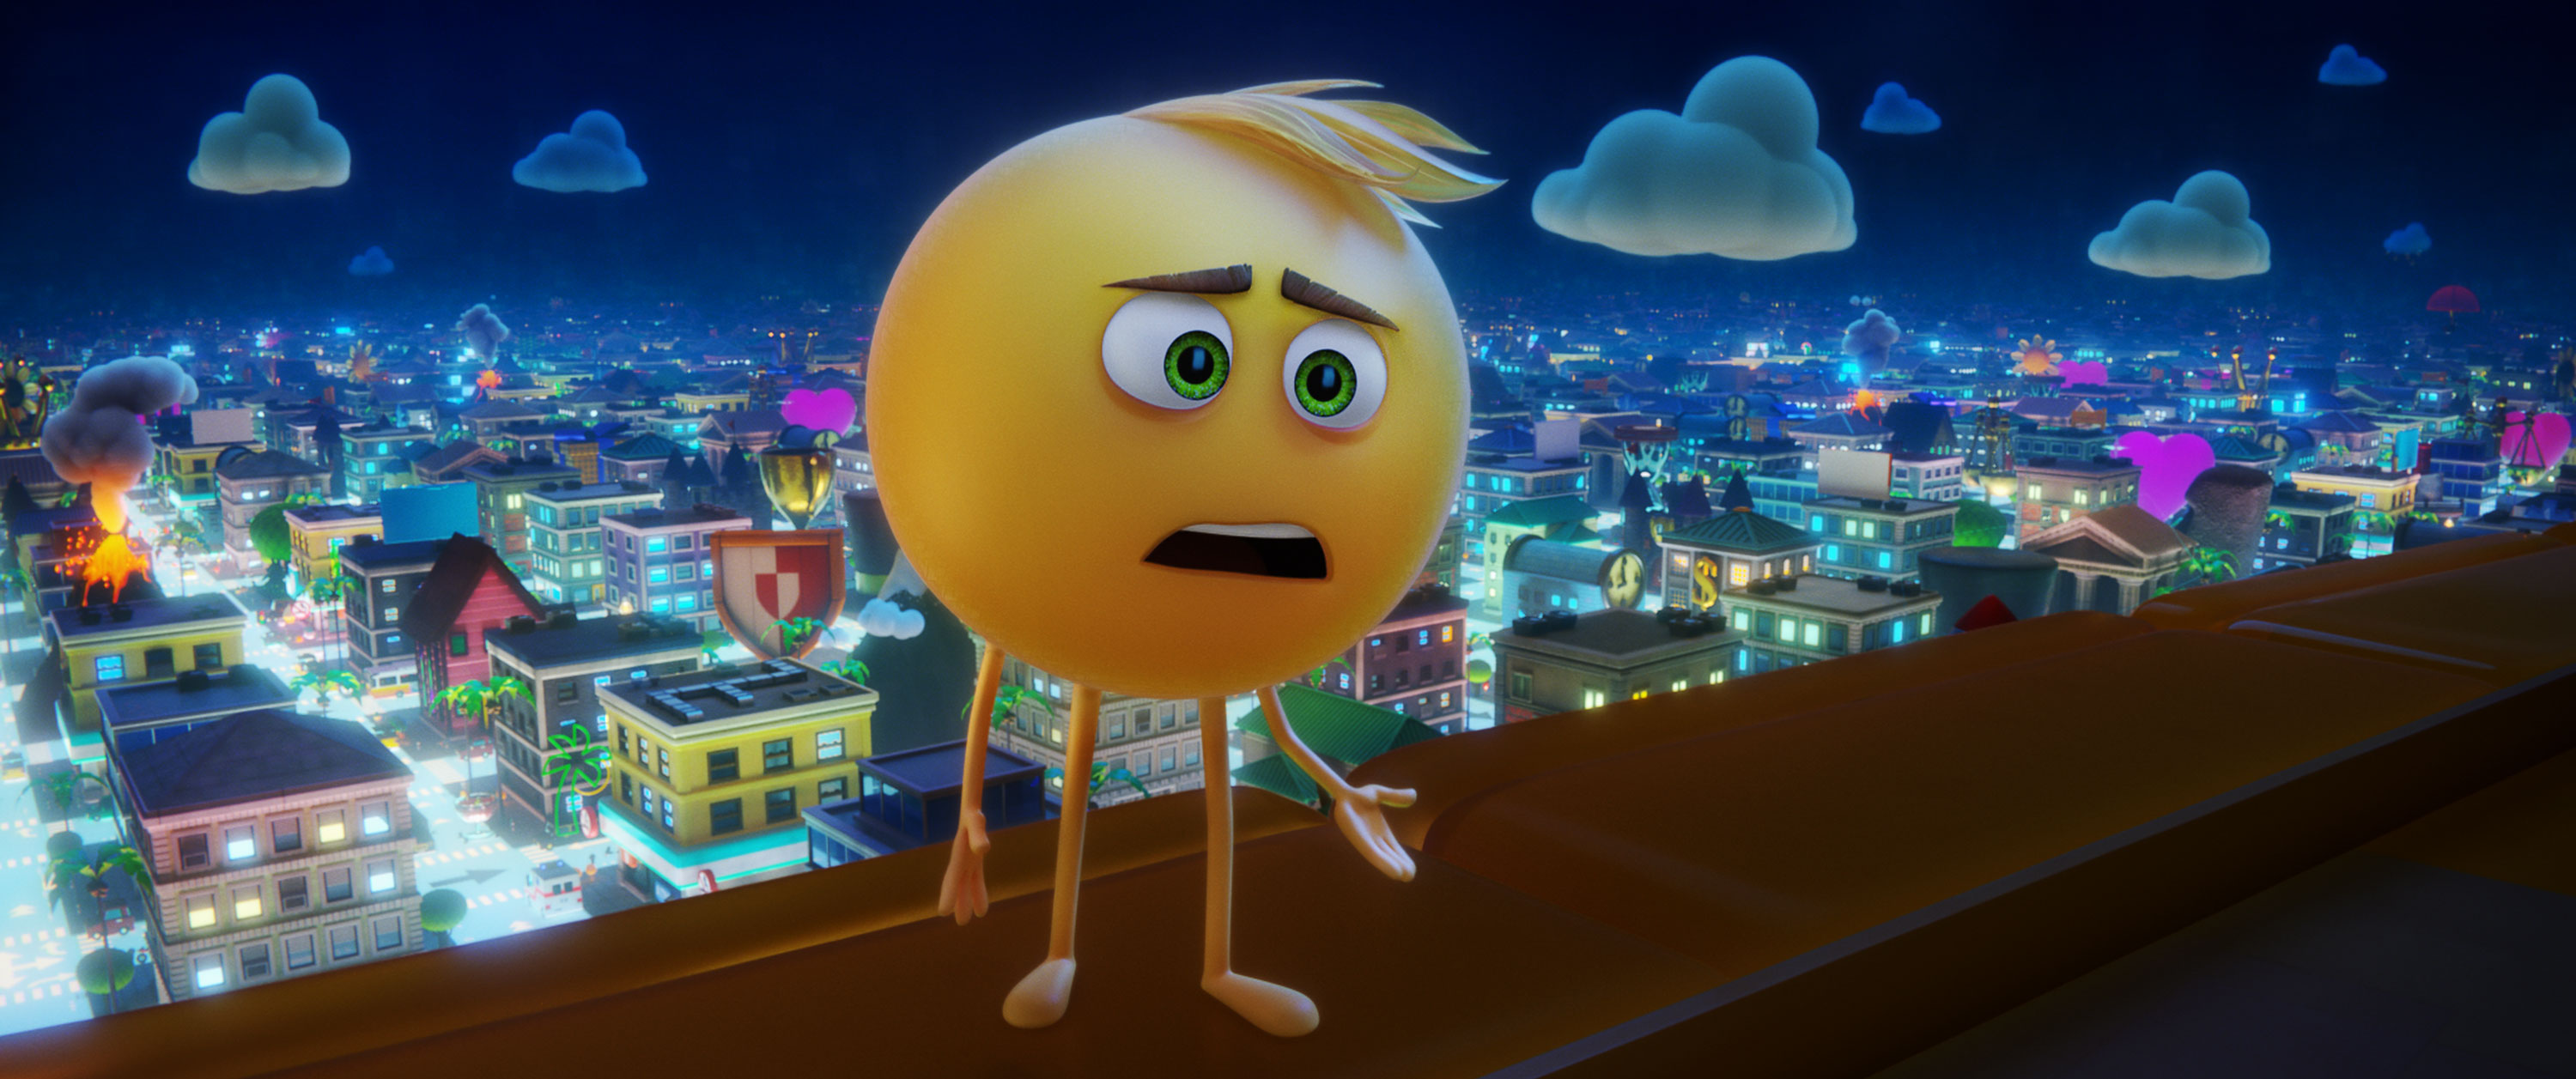 Characters in "The Emoji Movie" has many human-like characteristics, such as arms and legs. (Image via Vulture)